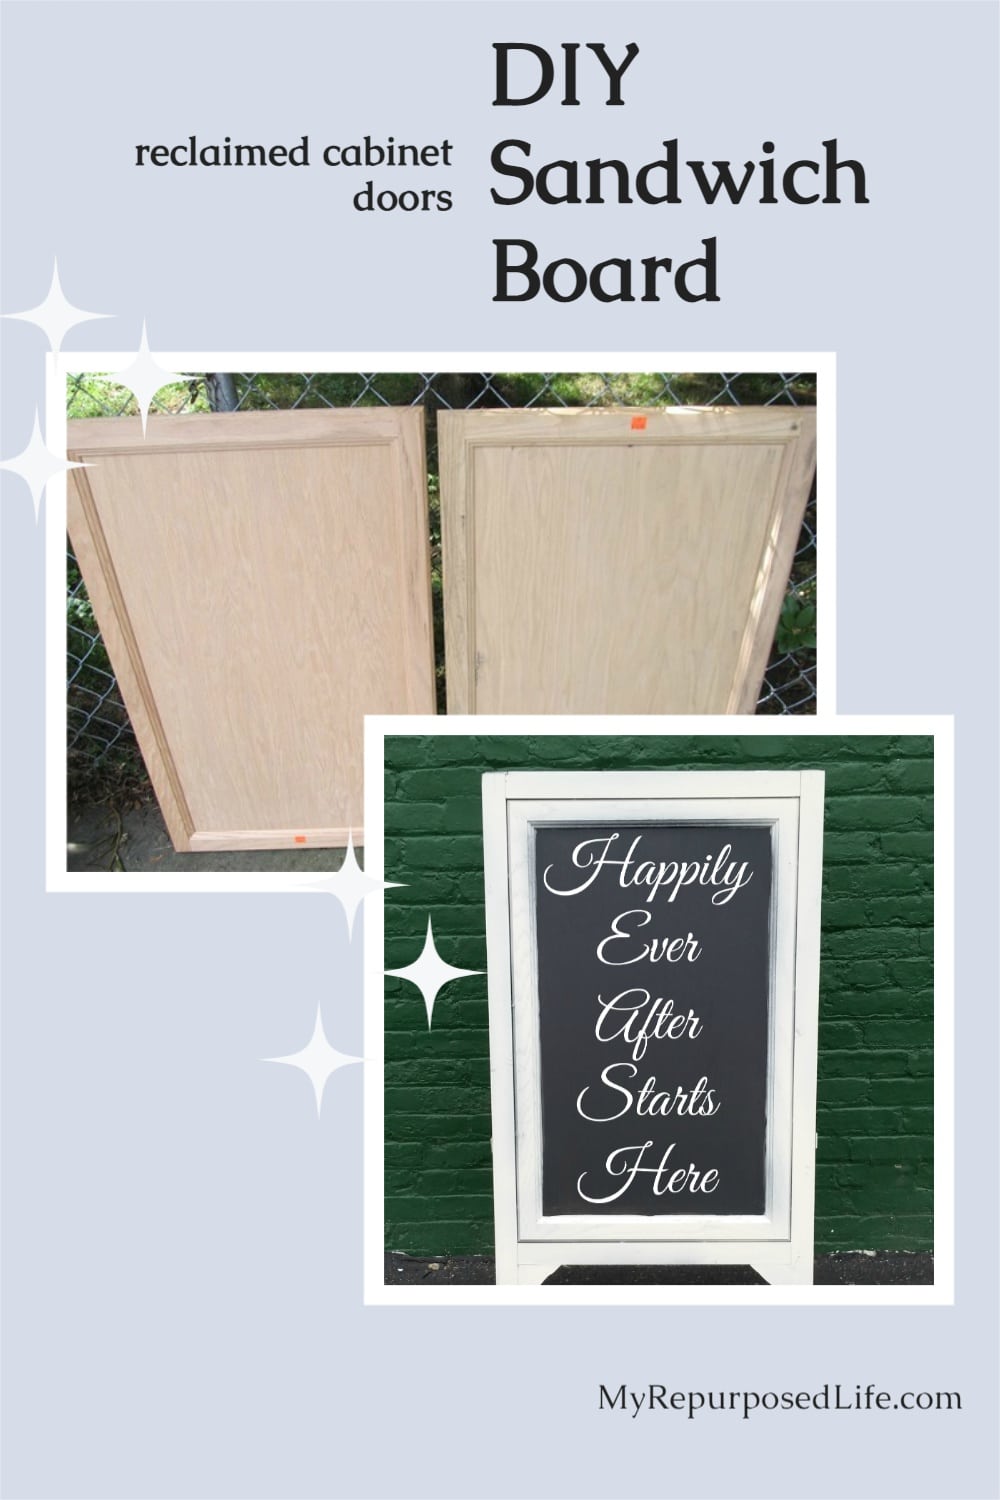 How to make a DIY chalkboard easel using 2 large cabinet doors and some scrap wood. Perfect for cafe, wedding or the kids! Step by step directions. #MyRepurposedLife #Repurposed #cabinet #doors #chalkboard #easel via @repurposedlife